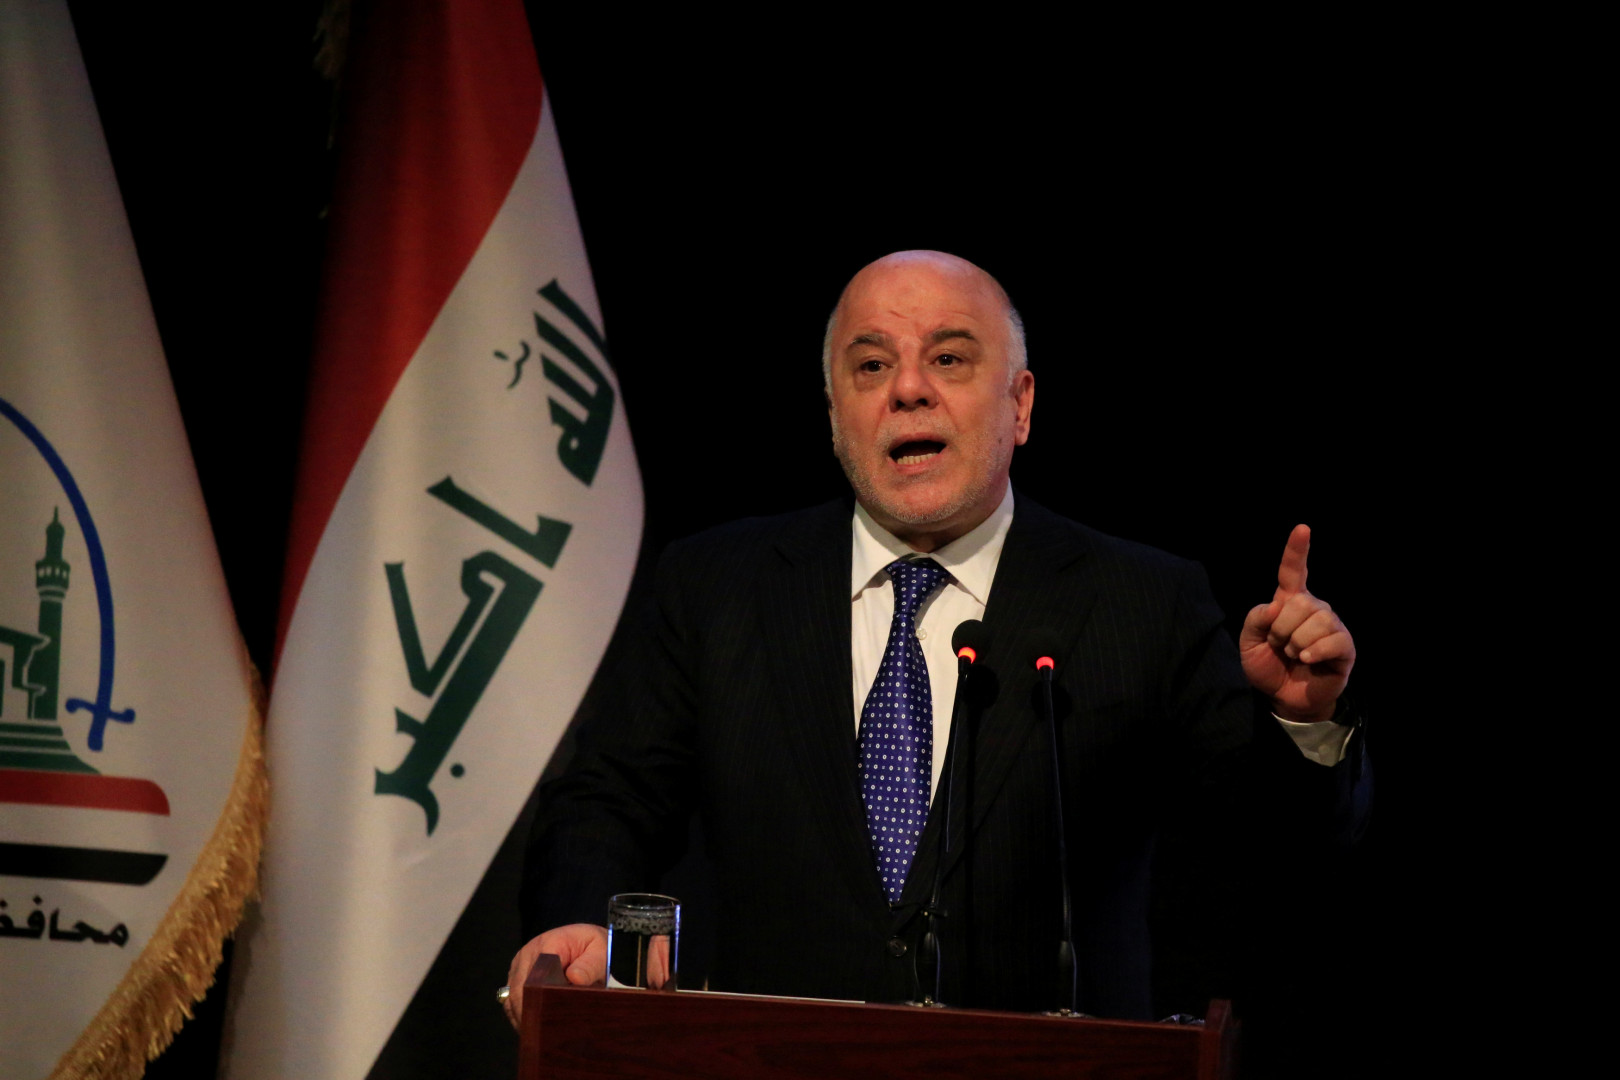 Al-Abadi is out of the political calculations as a candidate to head the next Iraqi government